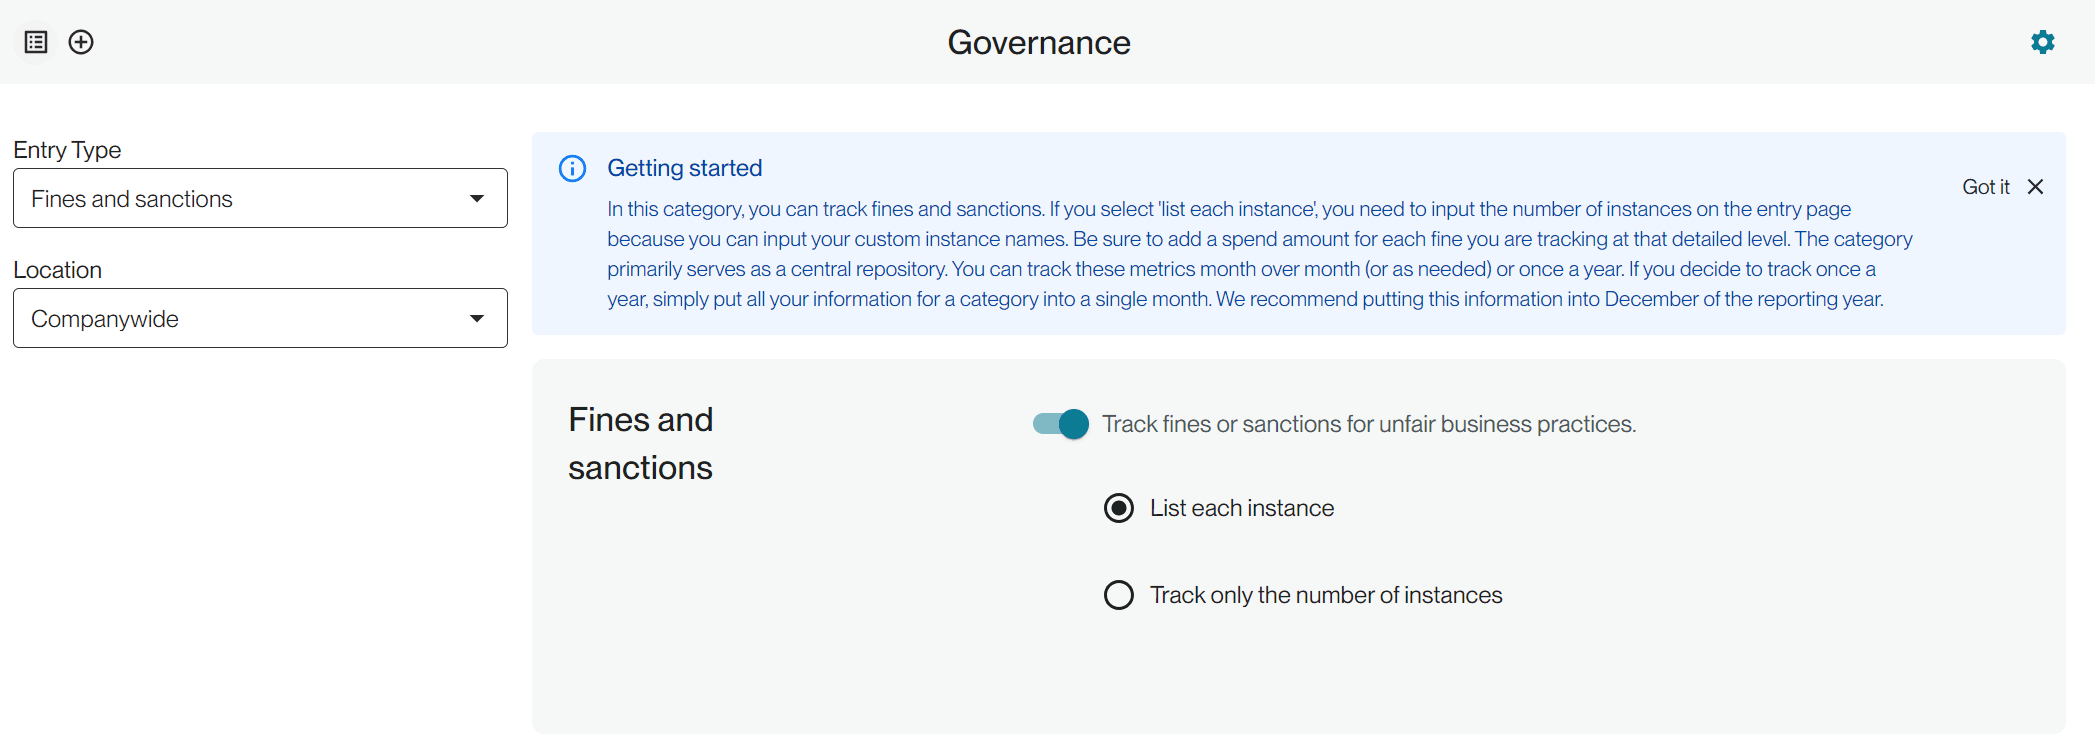 Governance configs.png